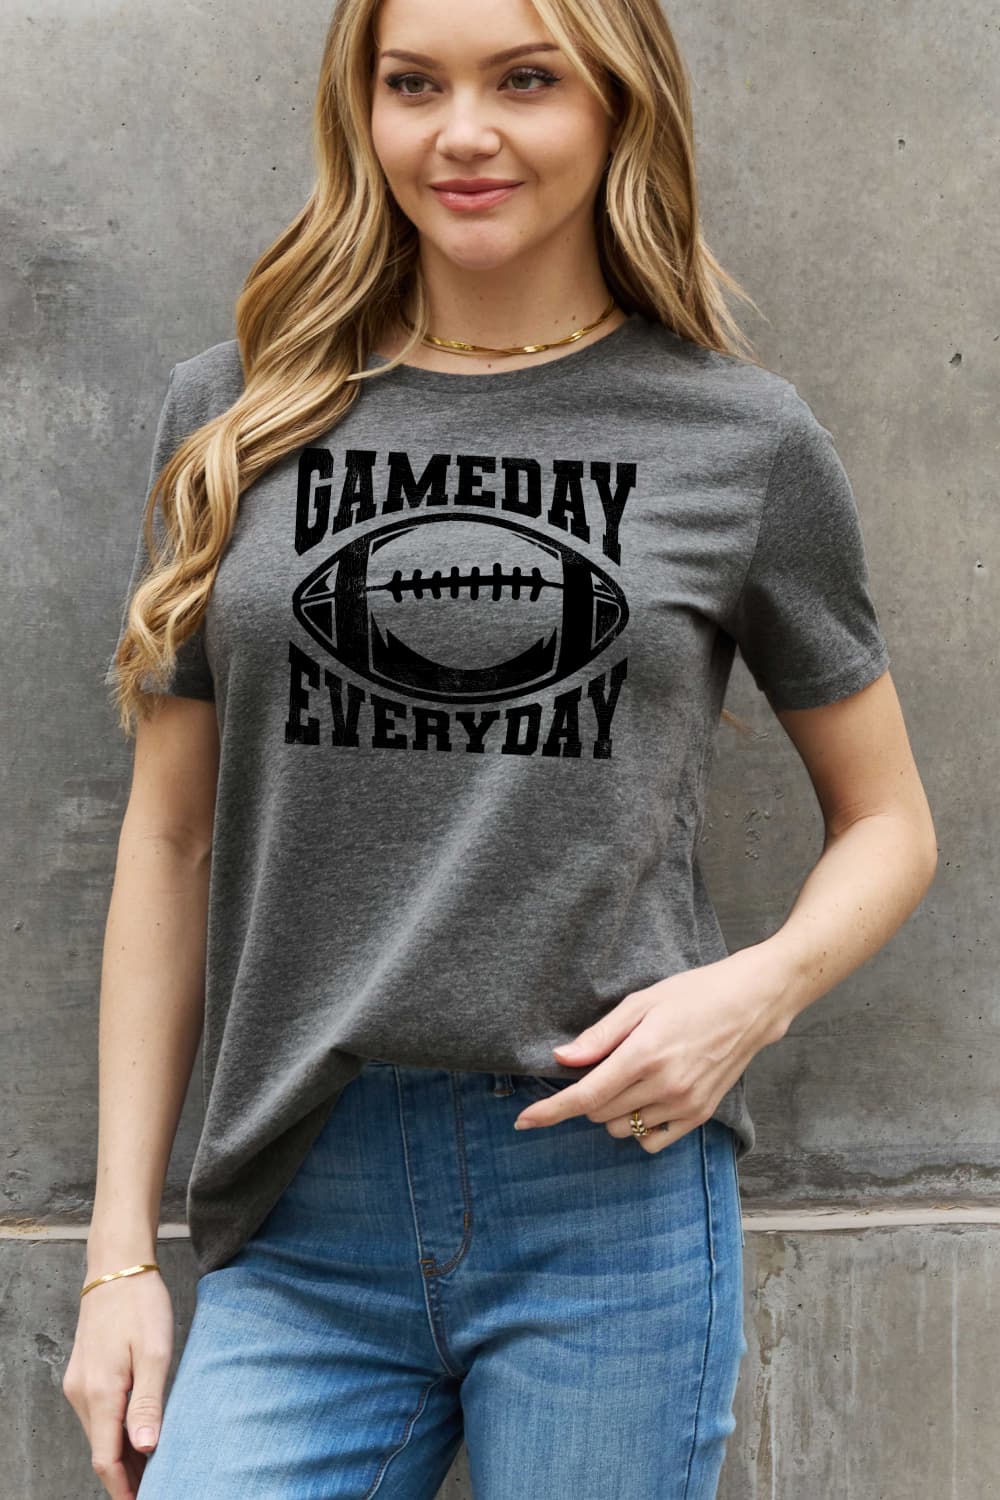 Simply Love Full Size GAMEDAY EVERYDAY Graphic Cotton Tee